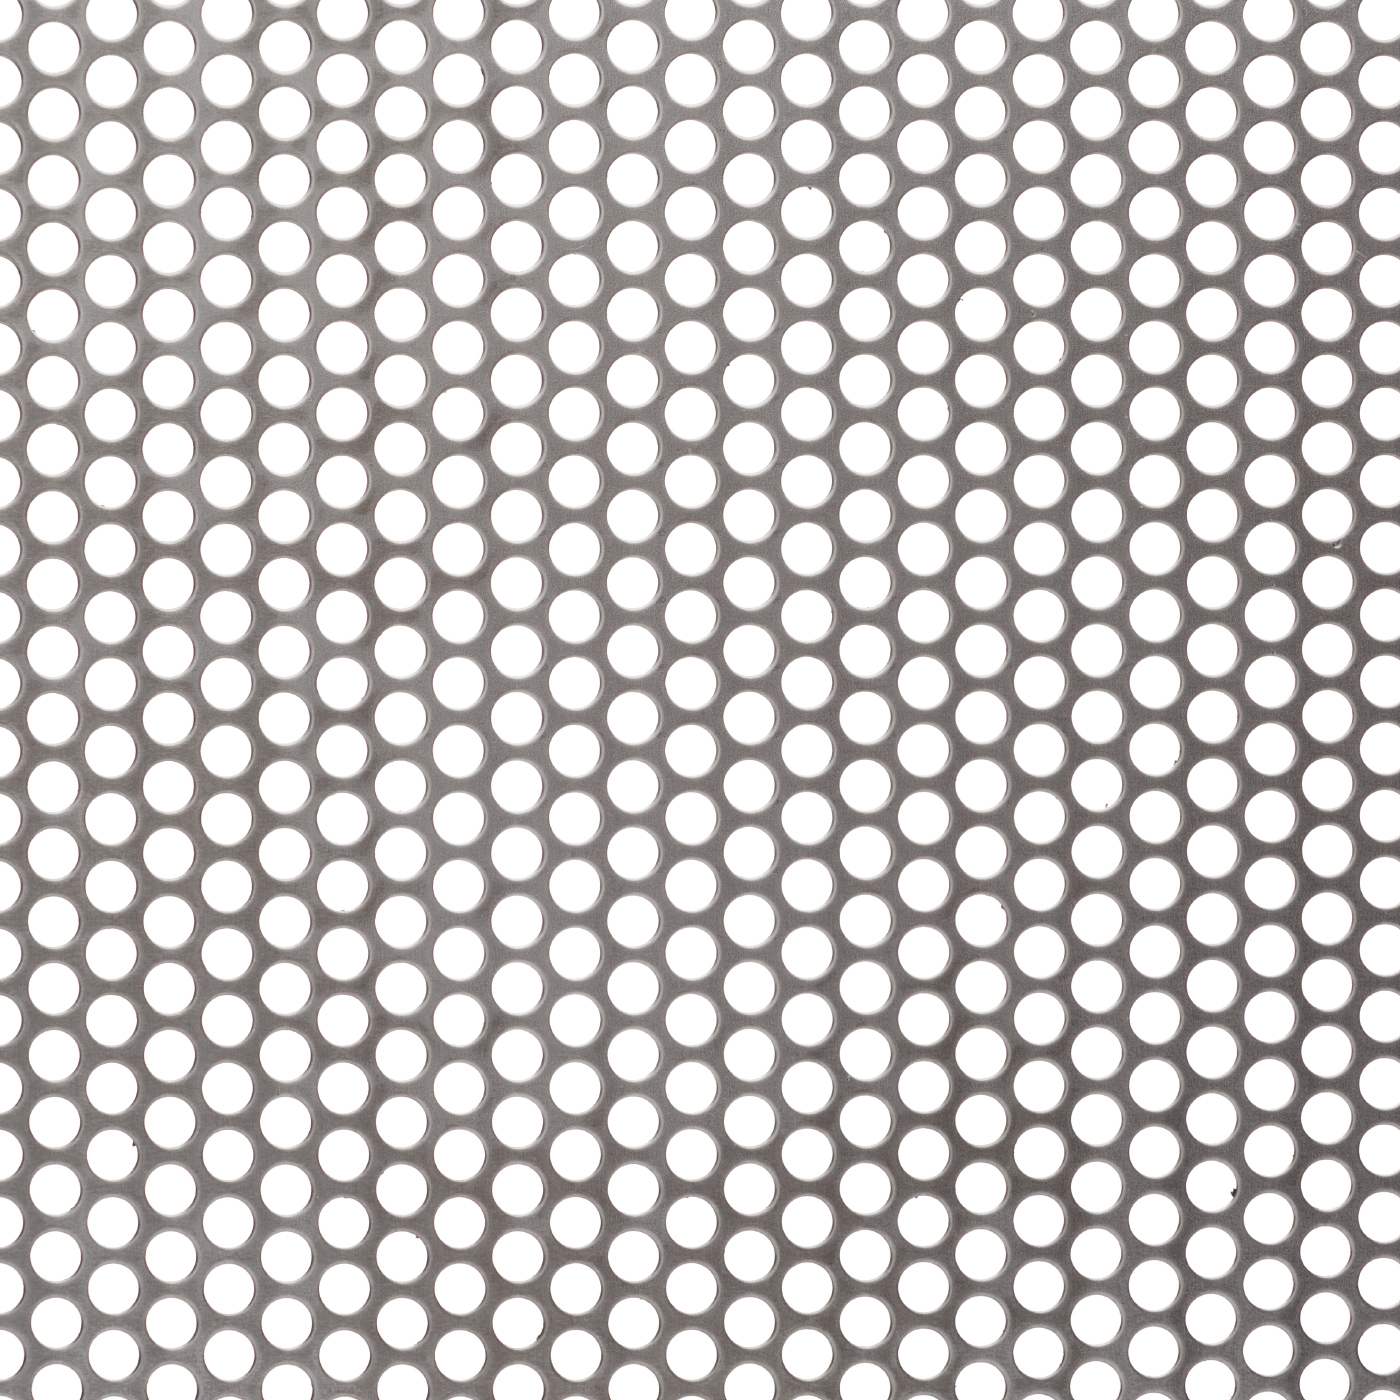 R06451 Perforated Metal Sheet: 6.4mm Round, 51% Open Area ...